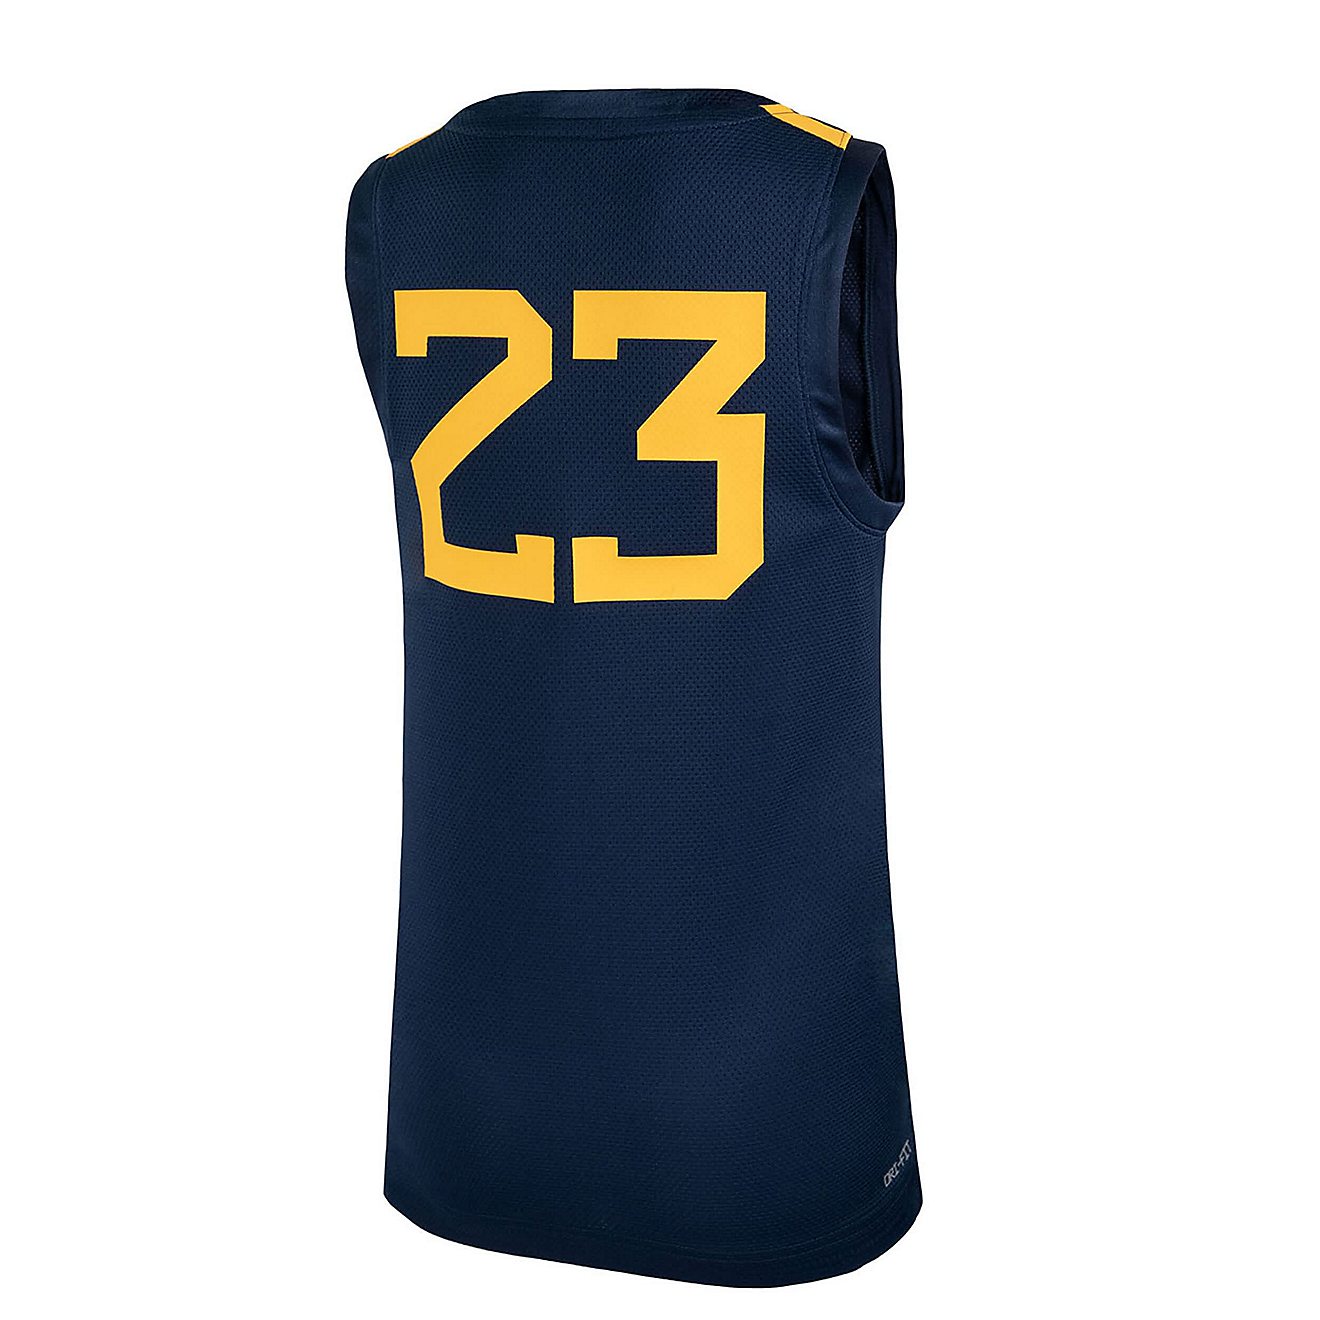 Youth Nike 23 West Virginia Mountaineers Icon Replica Basketball Jersey                                                          - view number 3